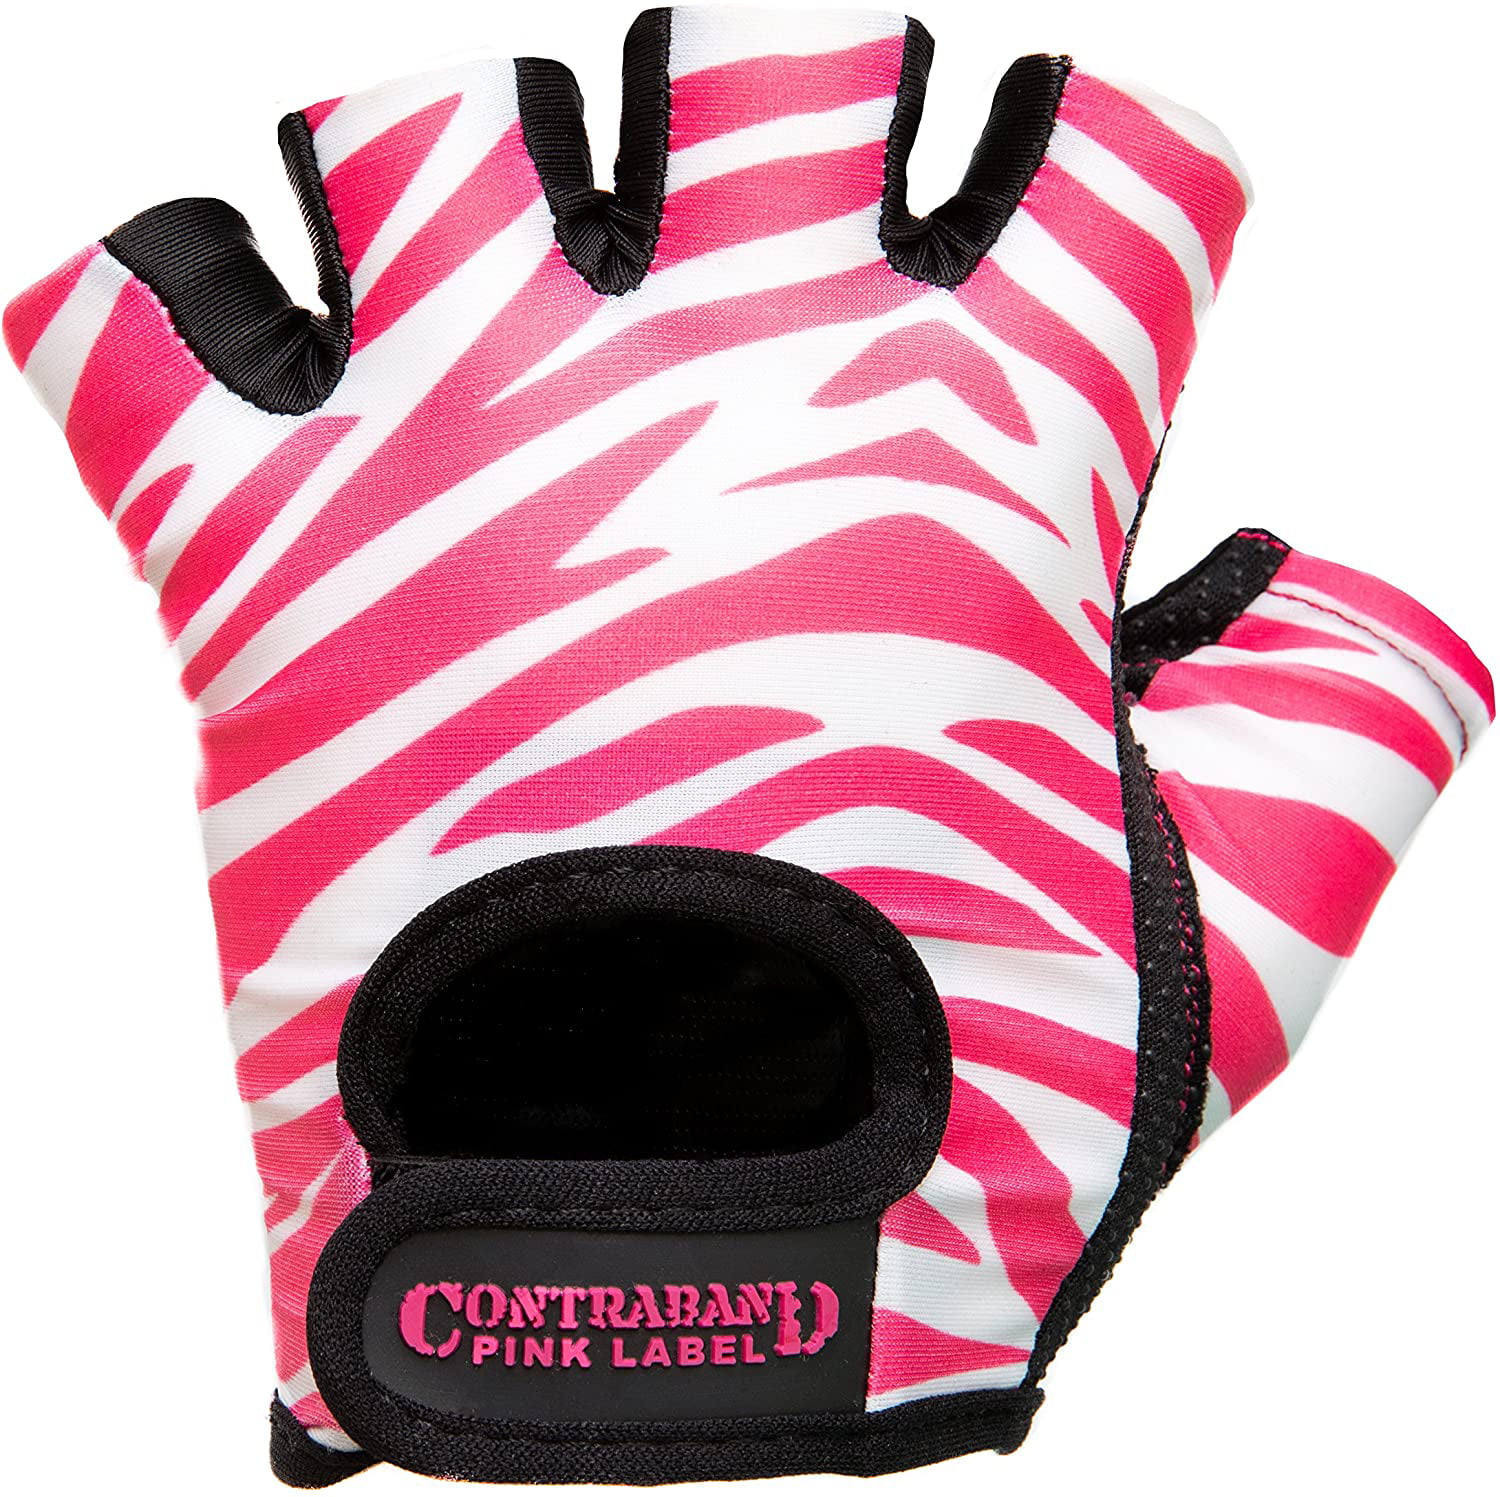 CLEARANCE 50% OFF! Contraband Pink Label 5277 Zebra Print Lifting Gloves PAIR 